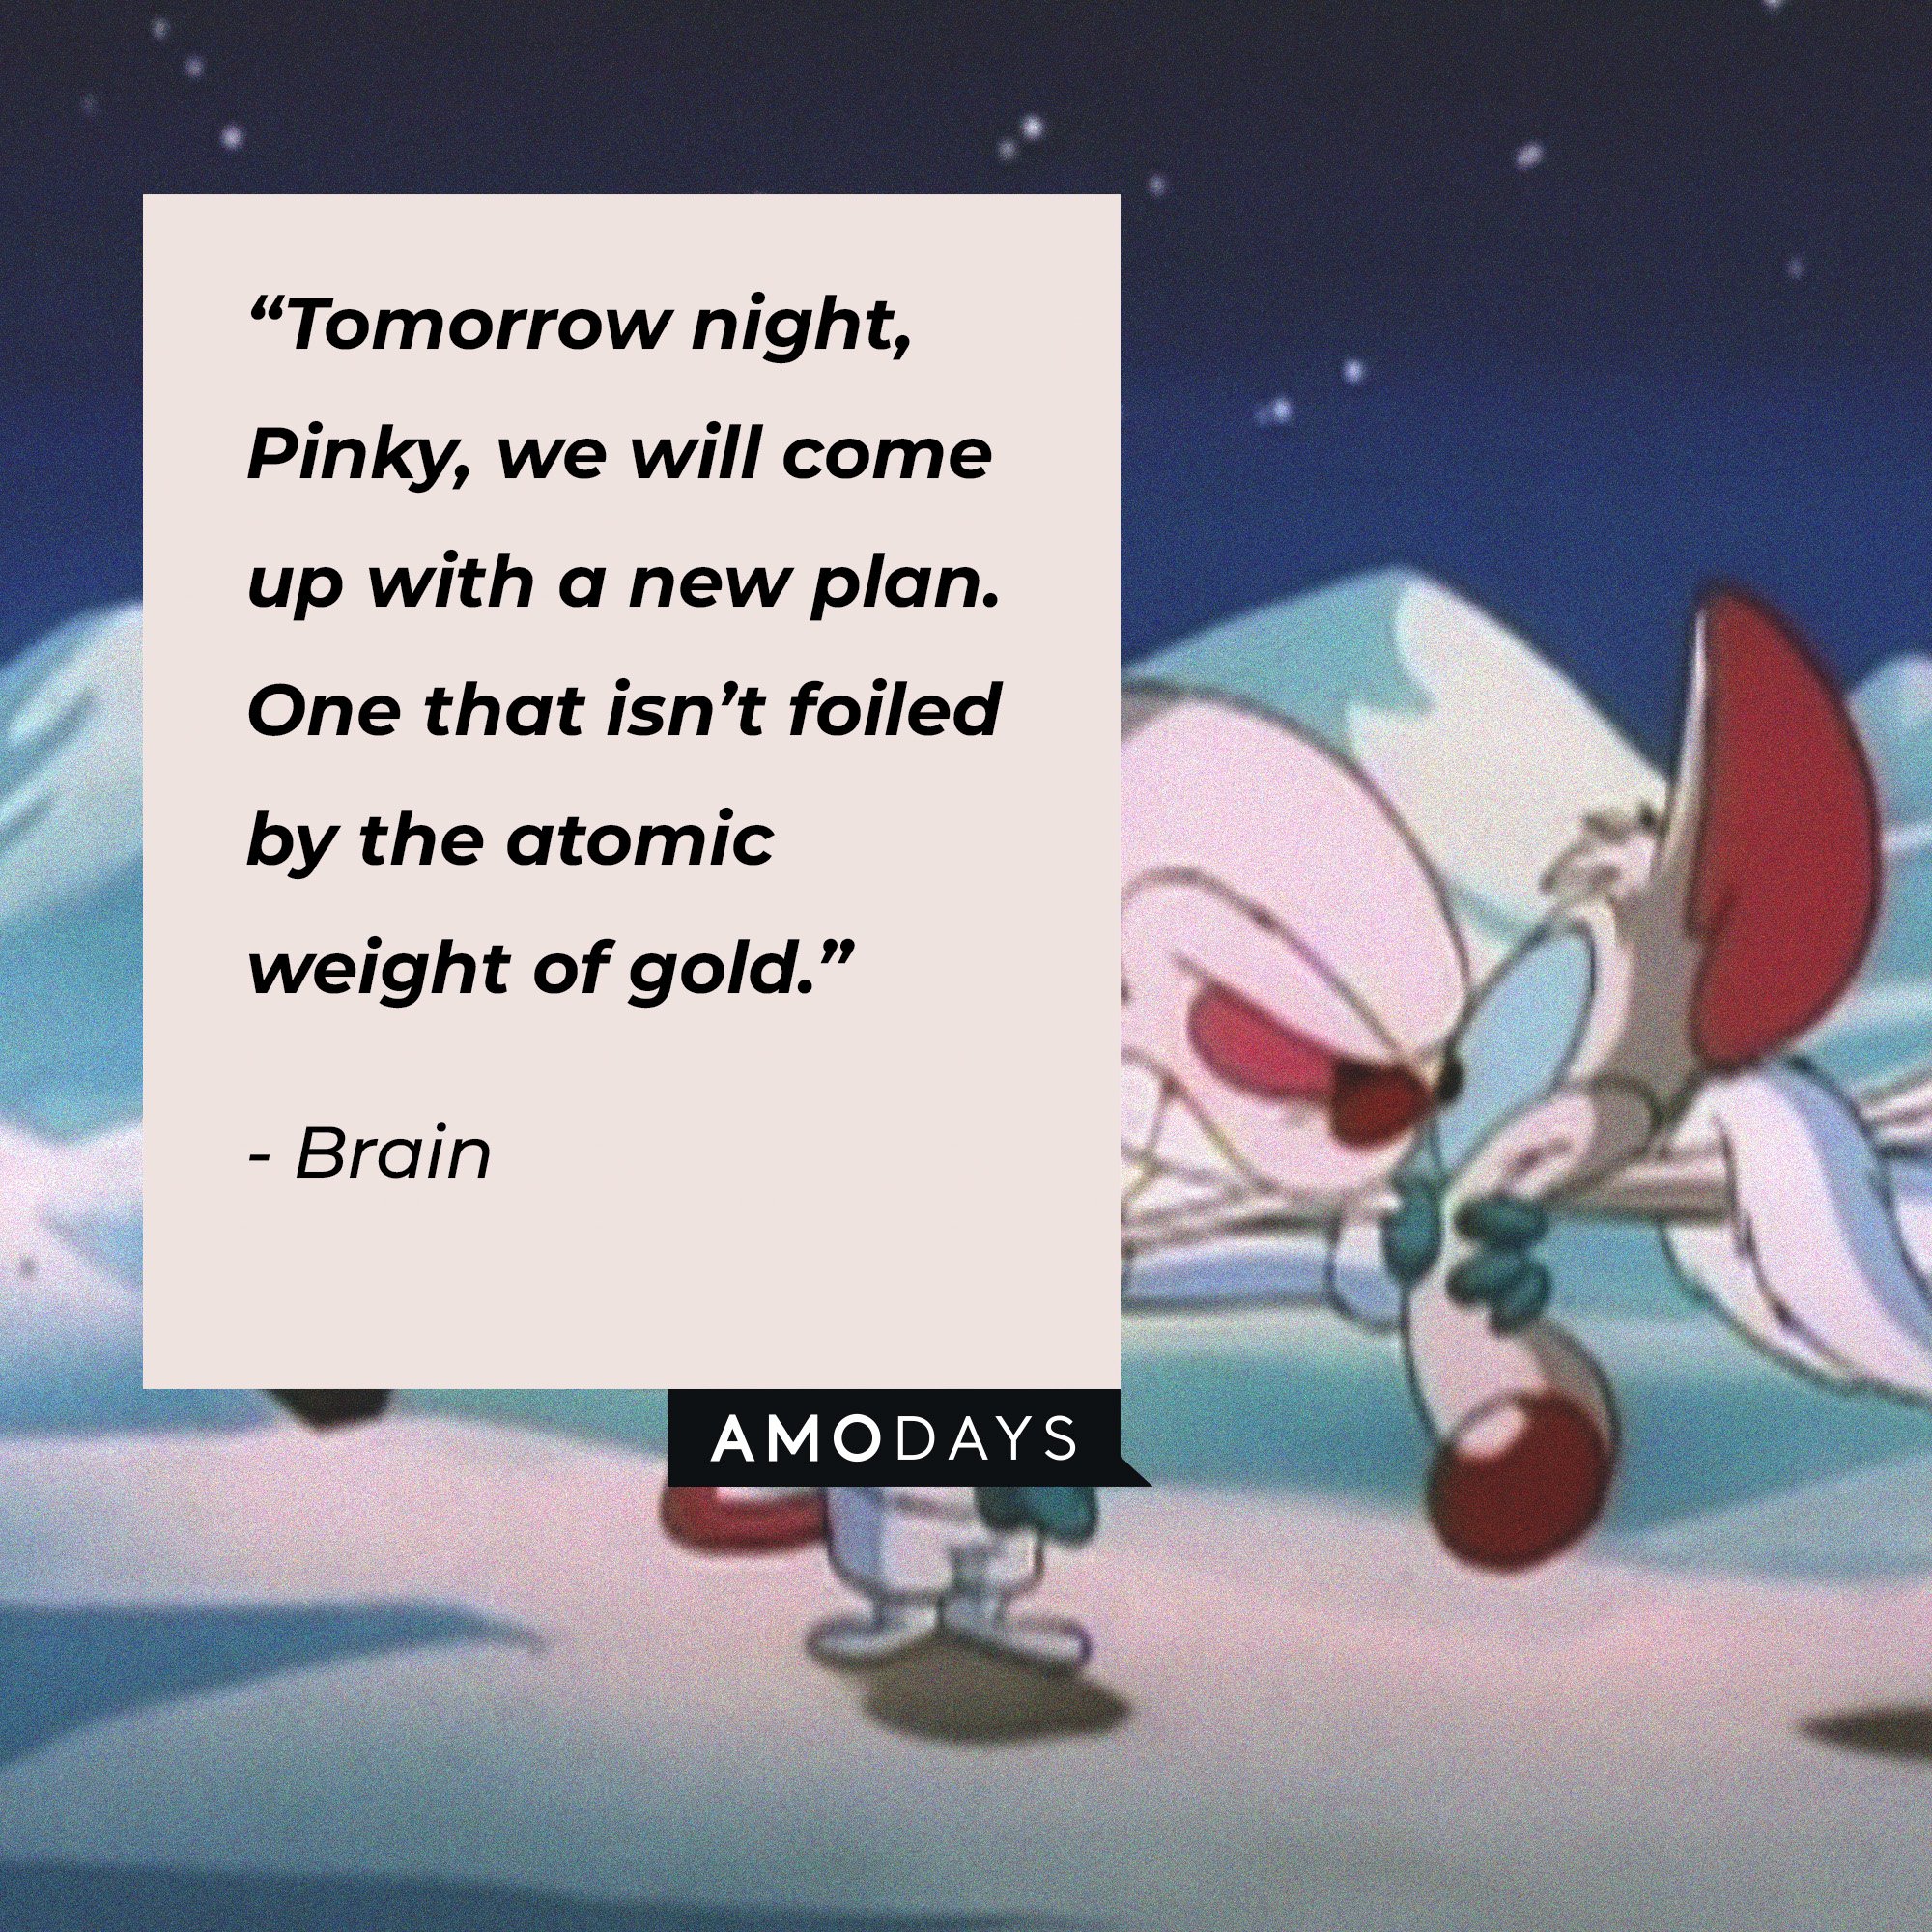 Brain's quote: “Tomorrow night, Pinky, we will come up with a new plan. One that isn’t foiled by the atomic weight of gold.” | Image: AmoDays